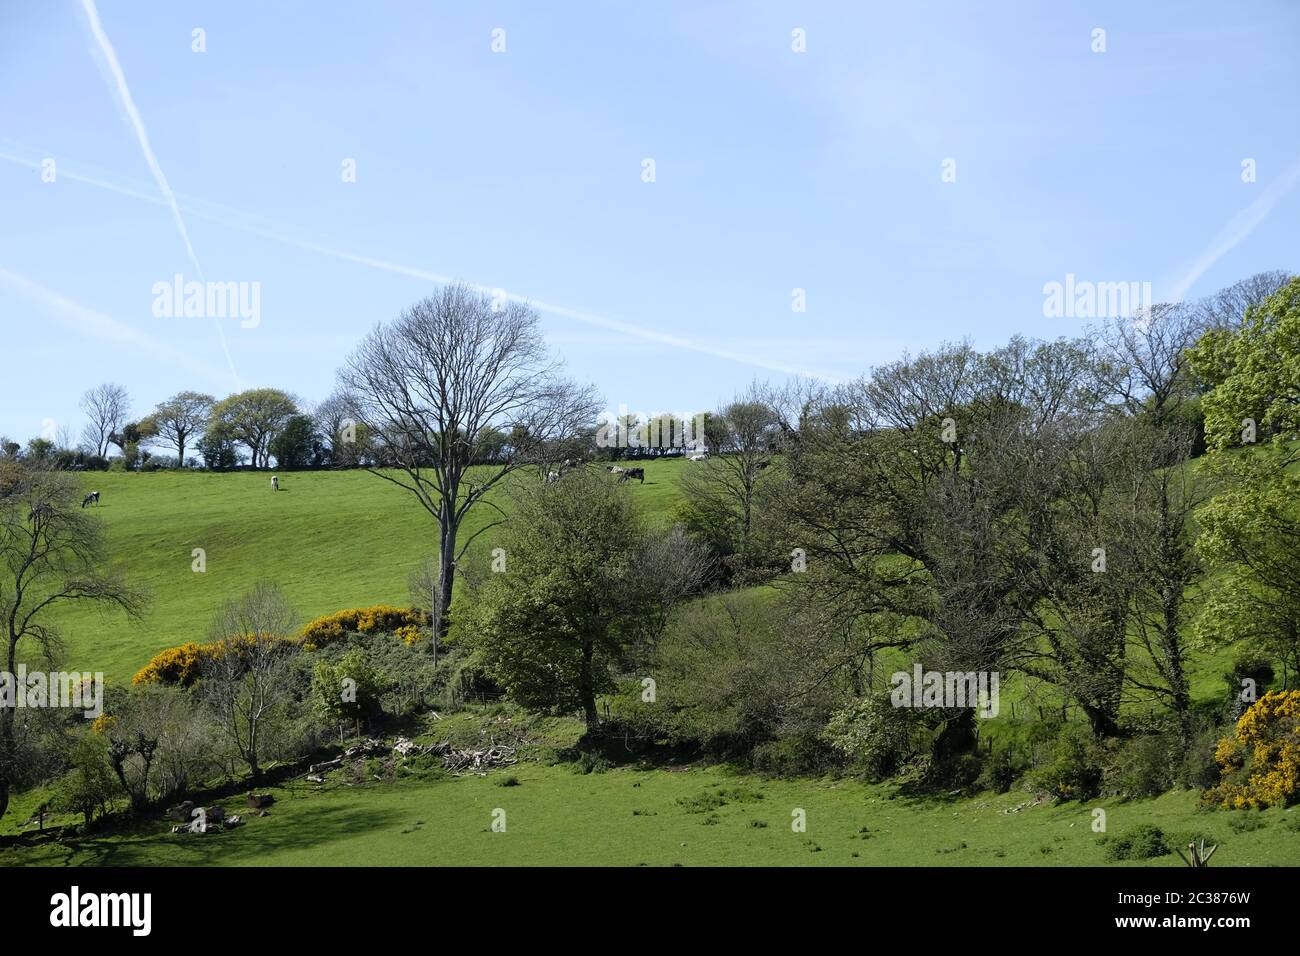 Grazing land with trees and bushes, Ceredigion, Wales.  Taken in early spring. Stock Photo